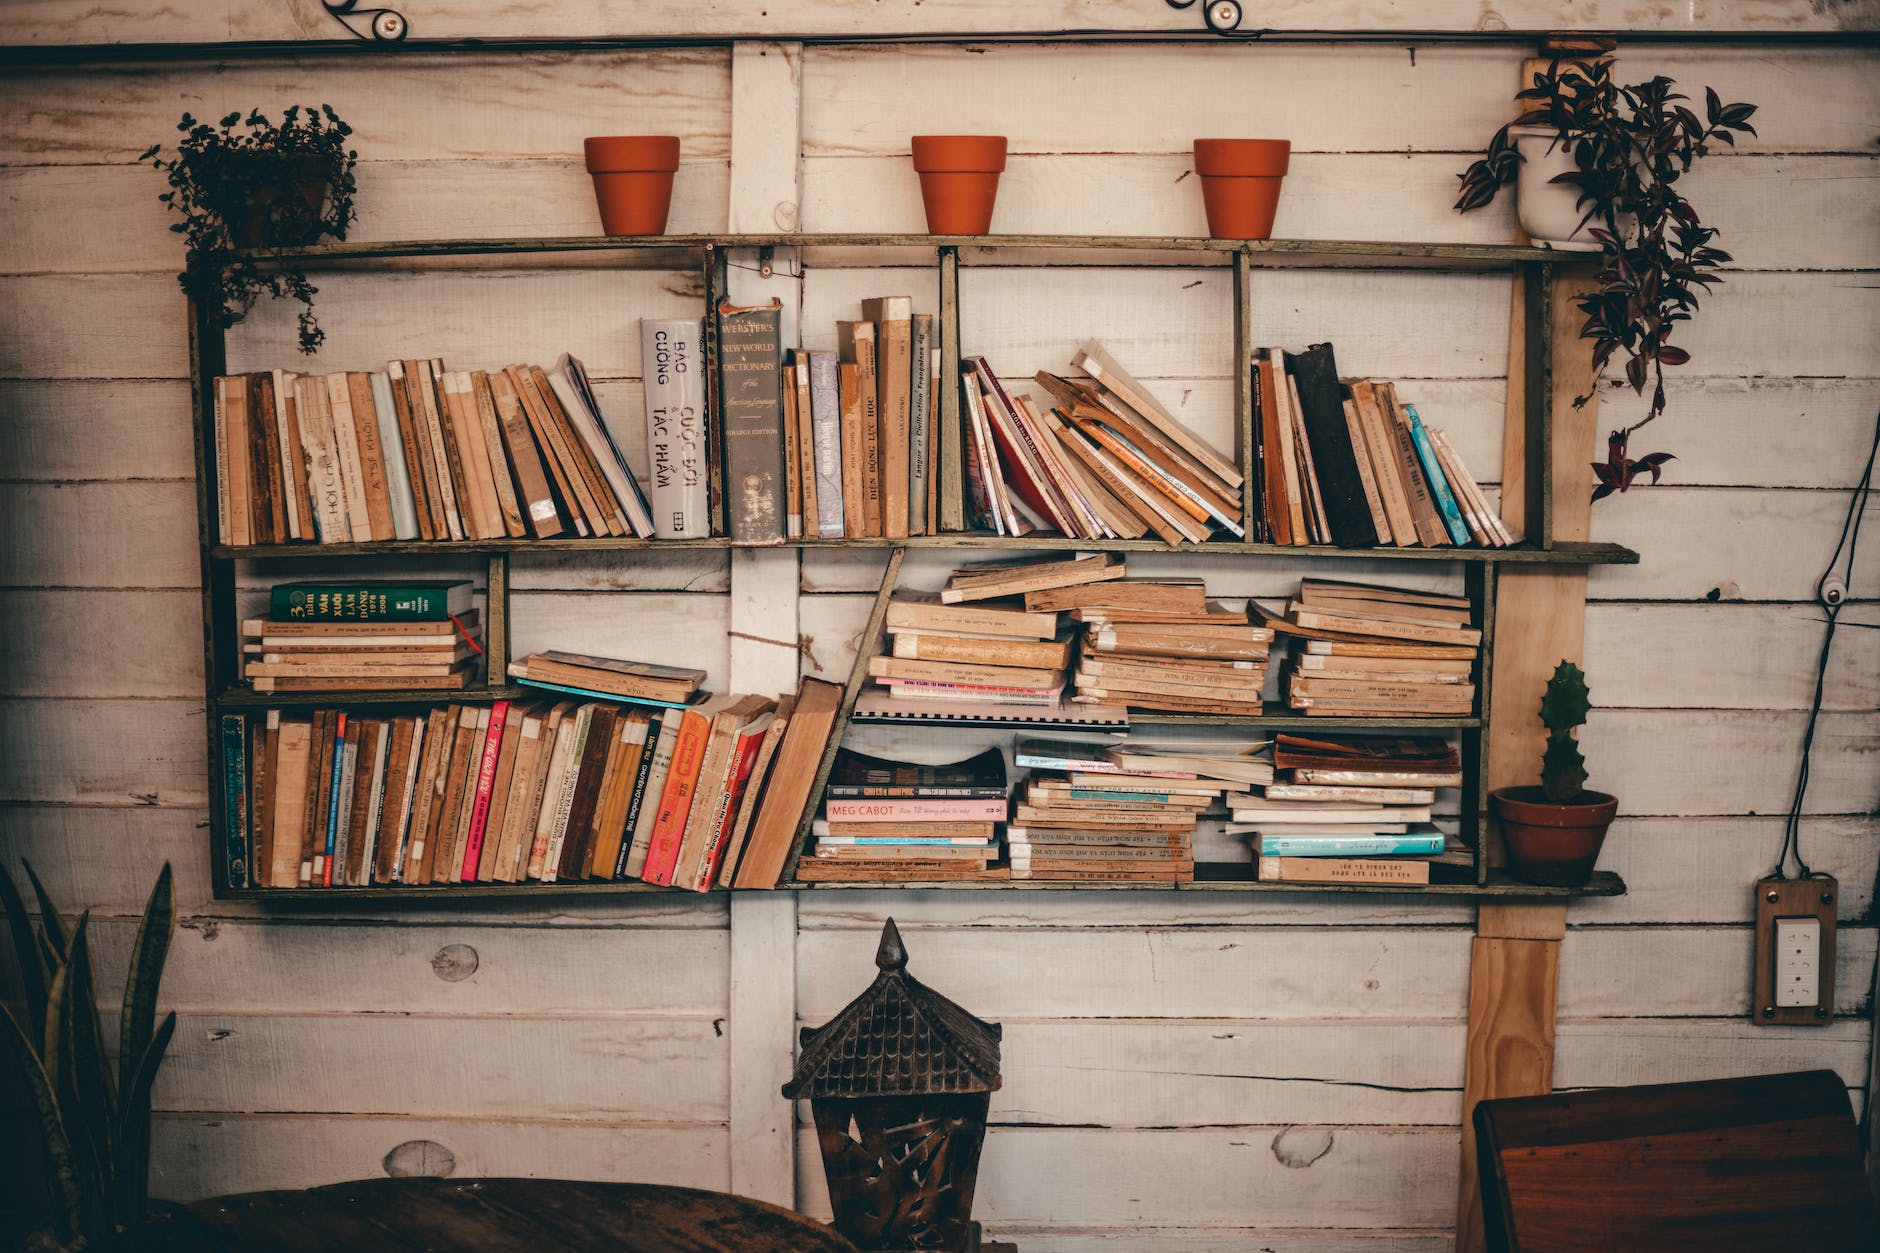 Picture of interior off white wall with wooden slates. The wall has 3 shelves on it covered with stacks of books, an a few plants. Picture gives sense of personal library. 